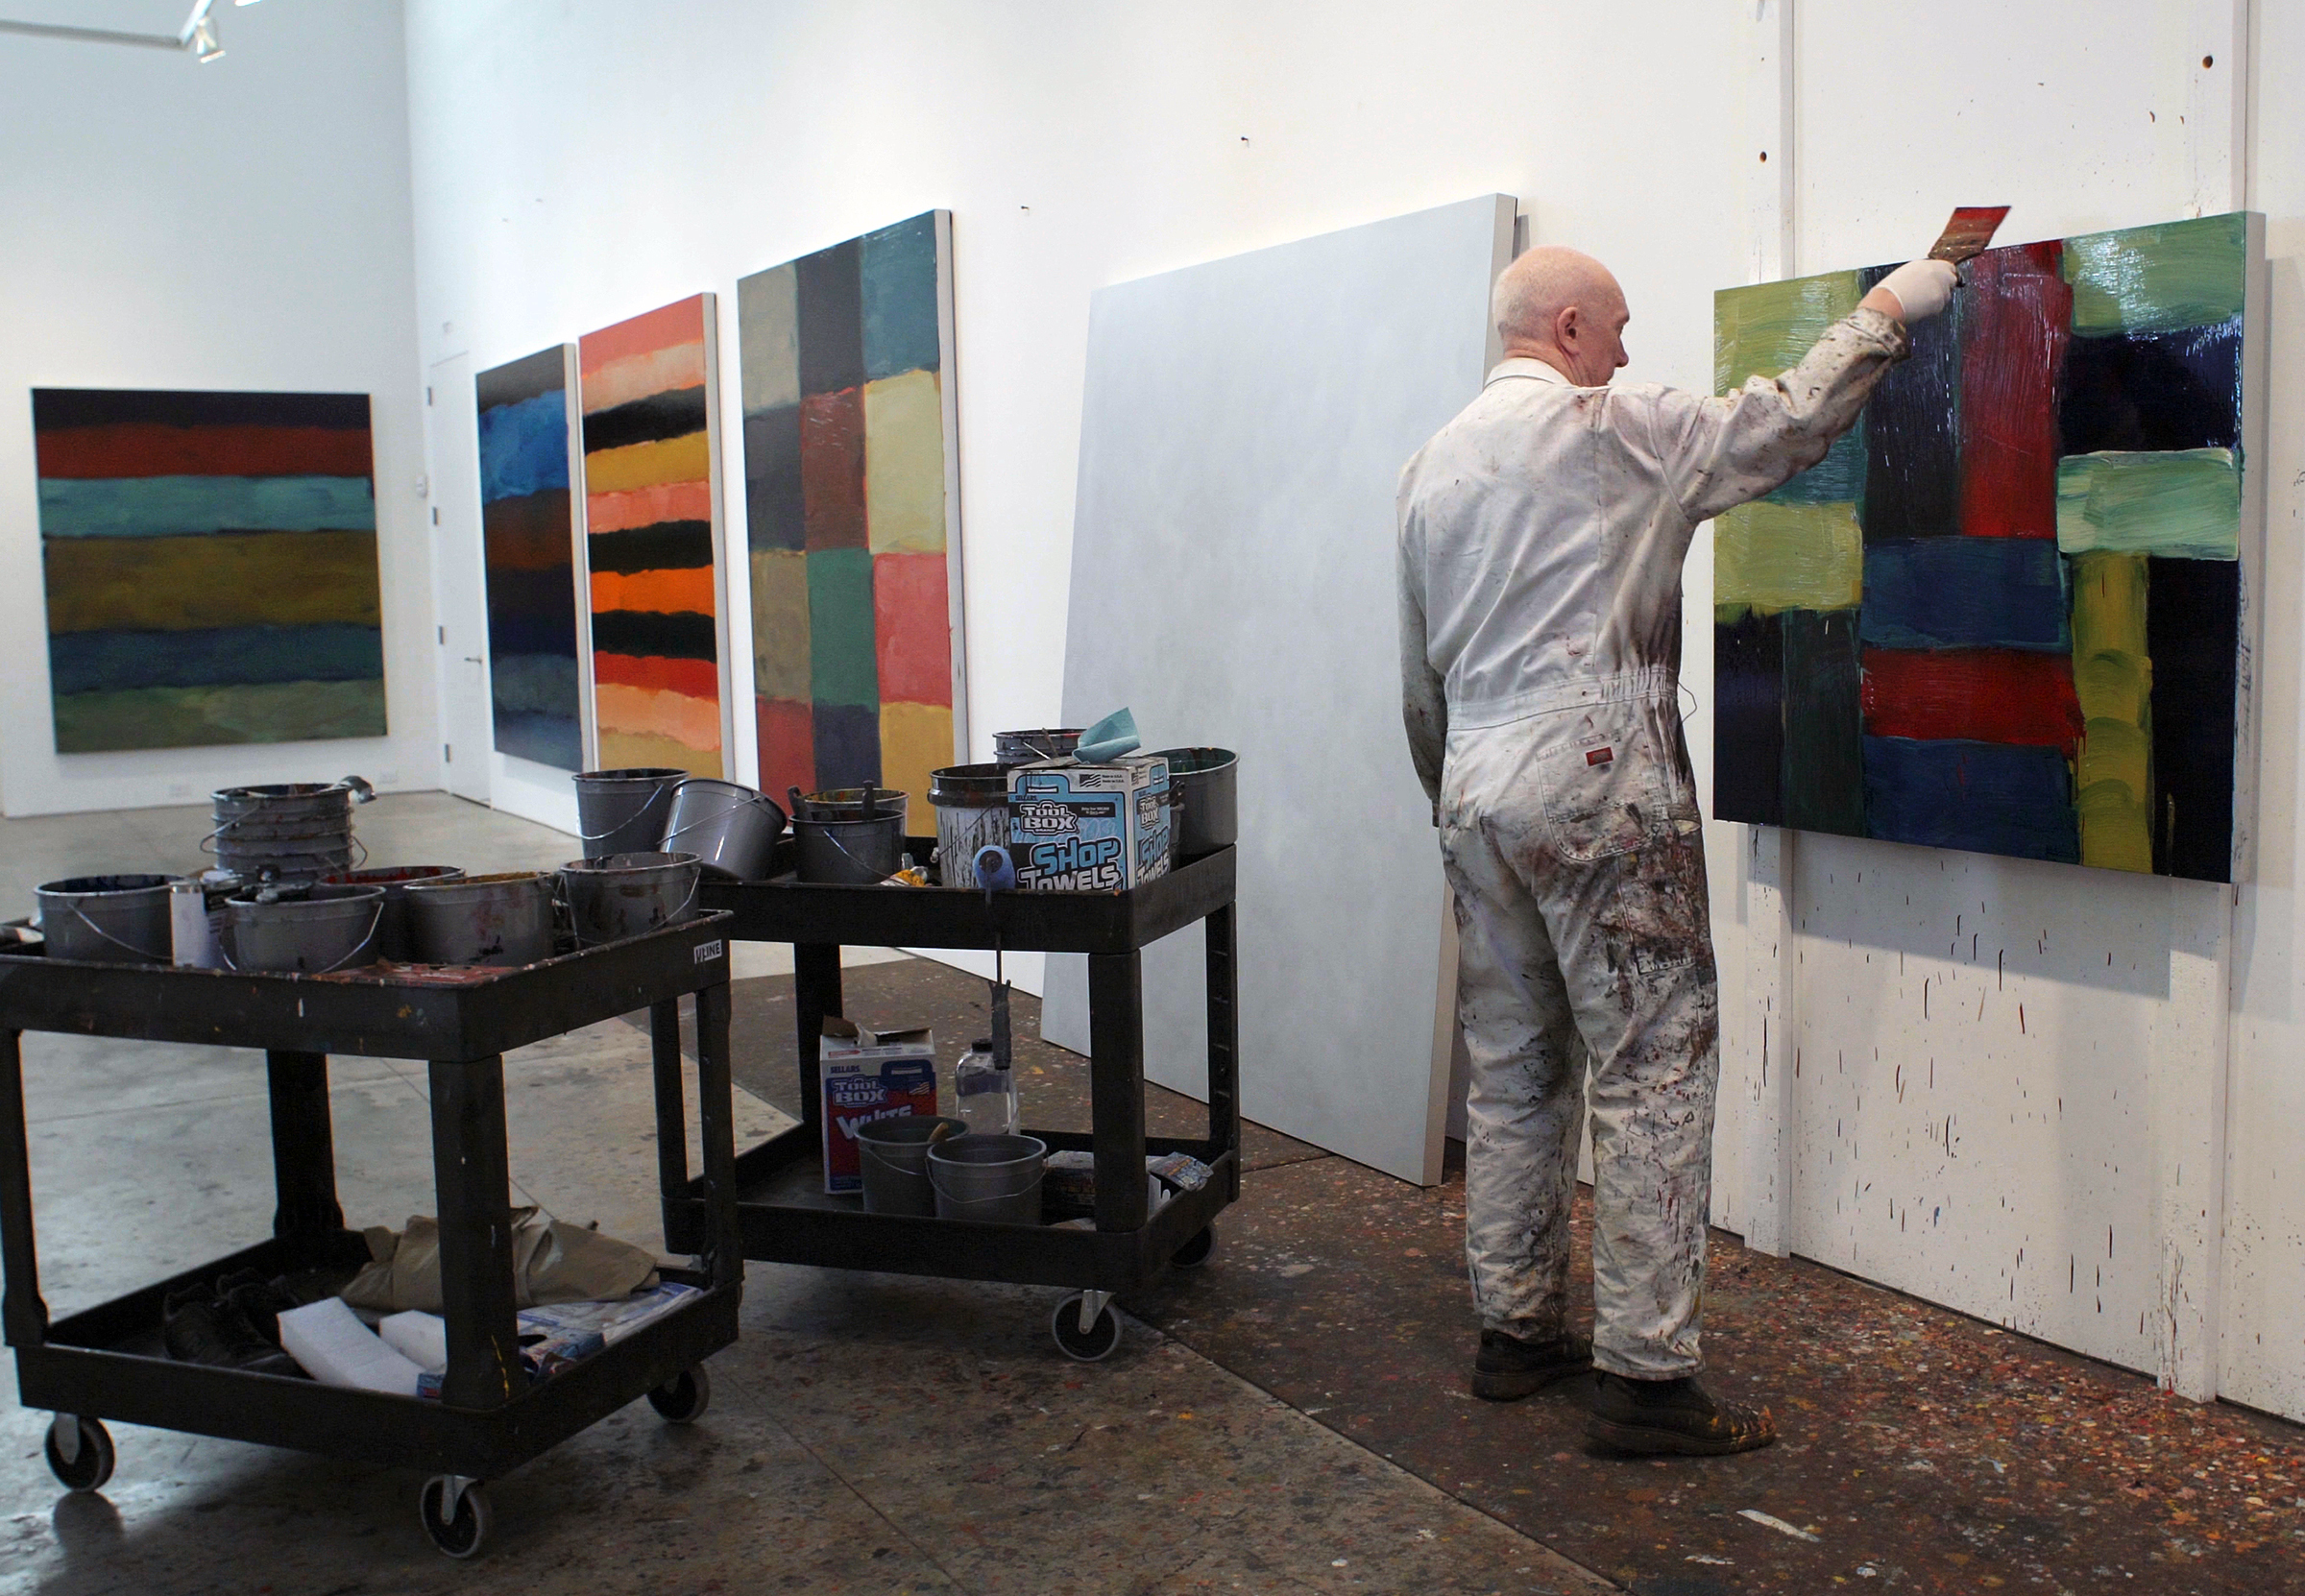 Film still from “Unstoppable” about artist Sean Scully.